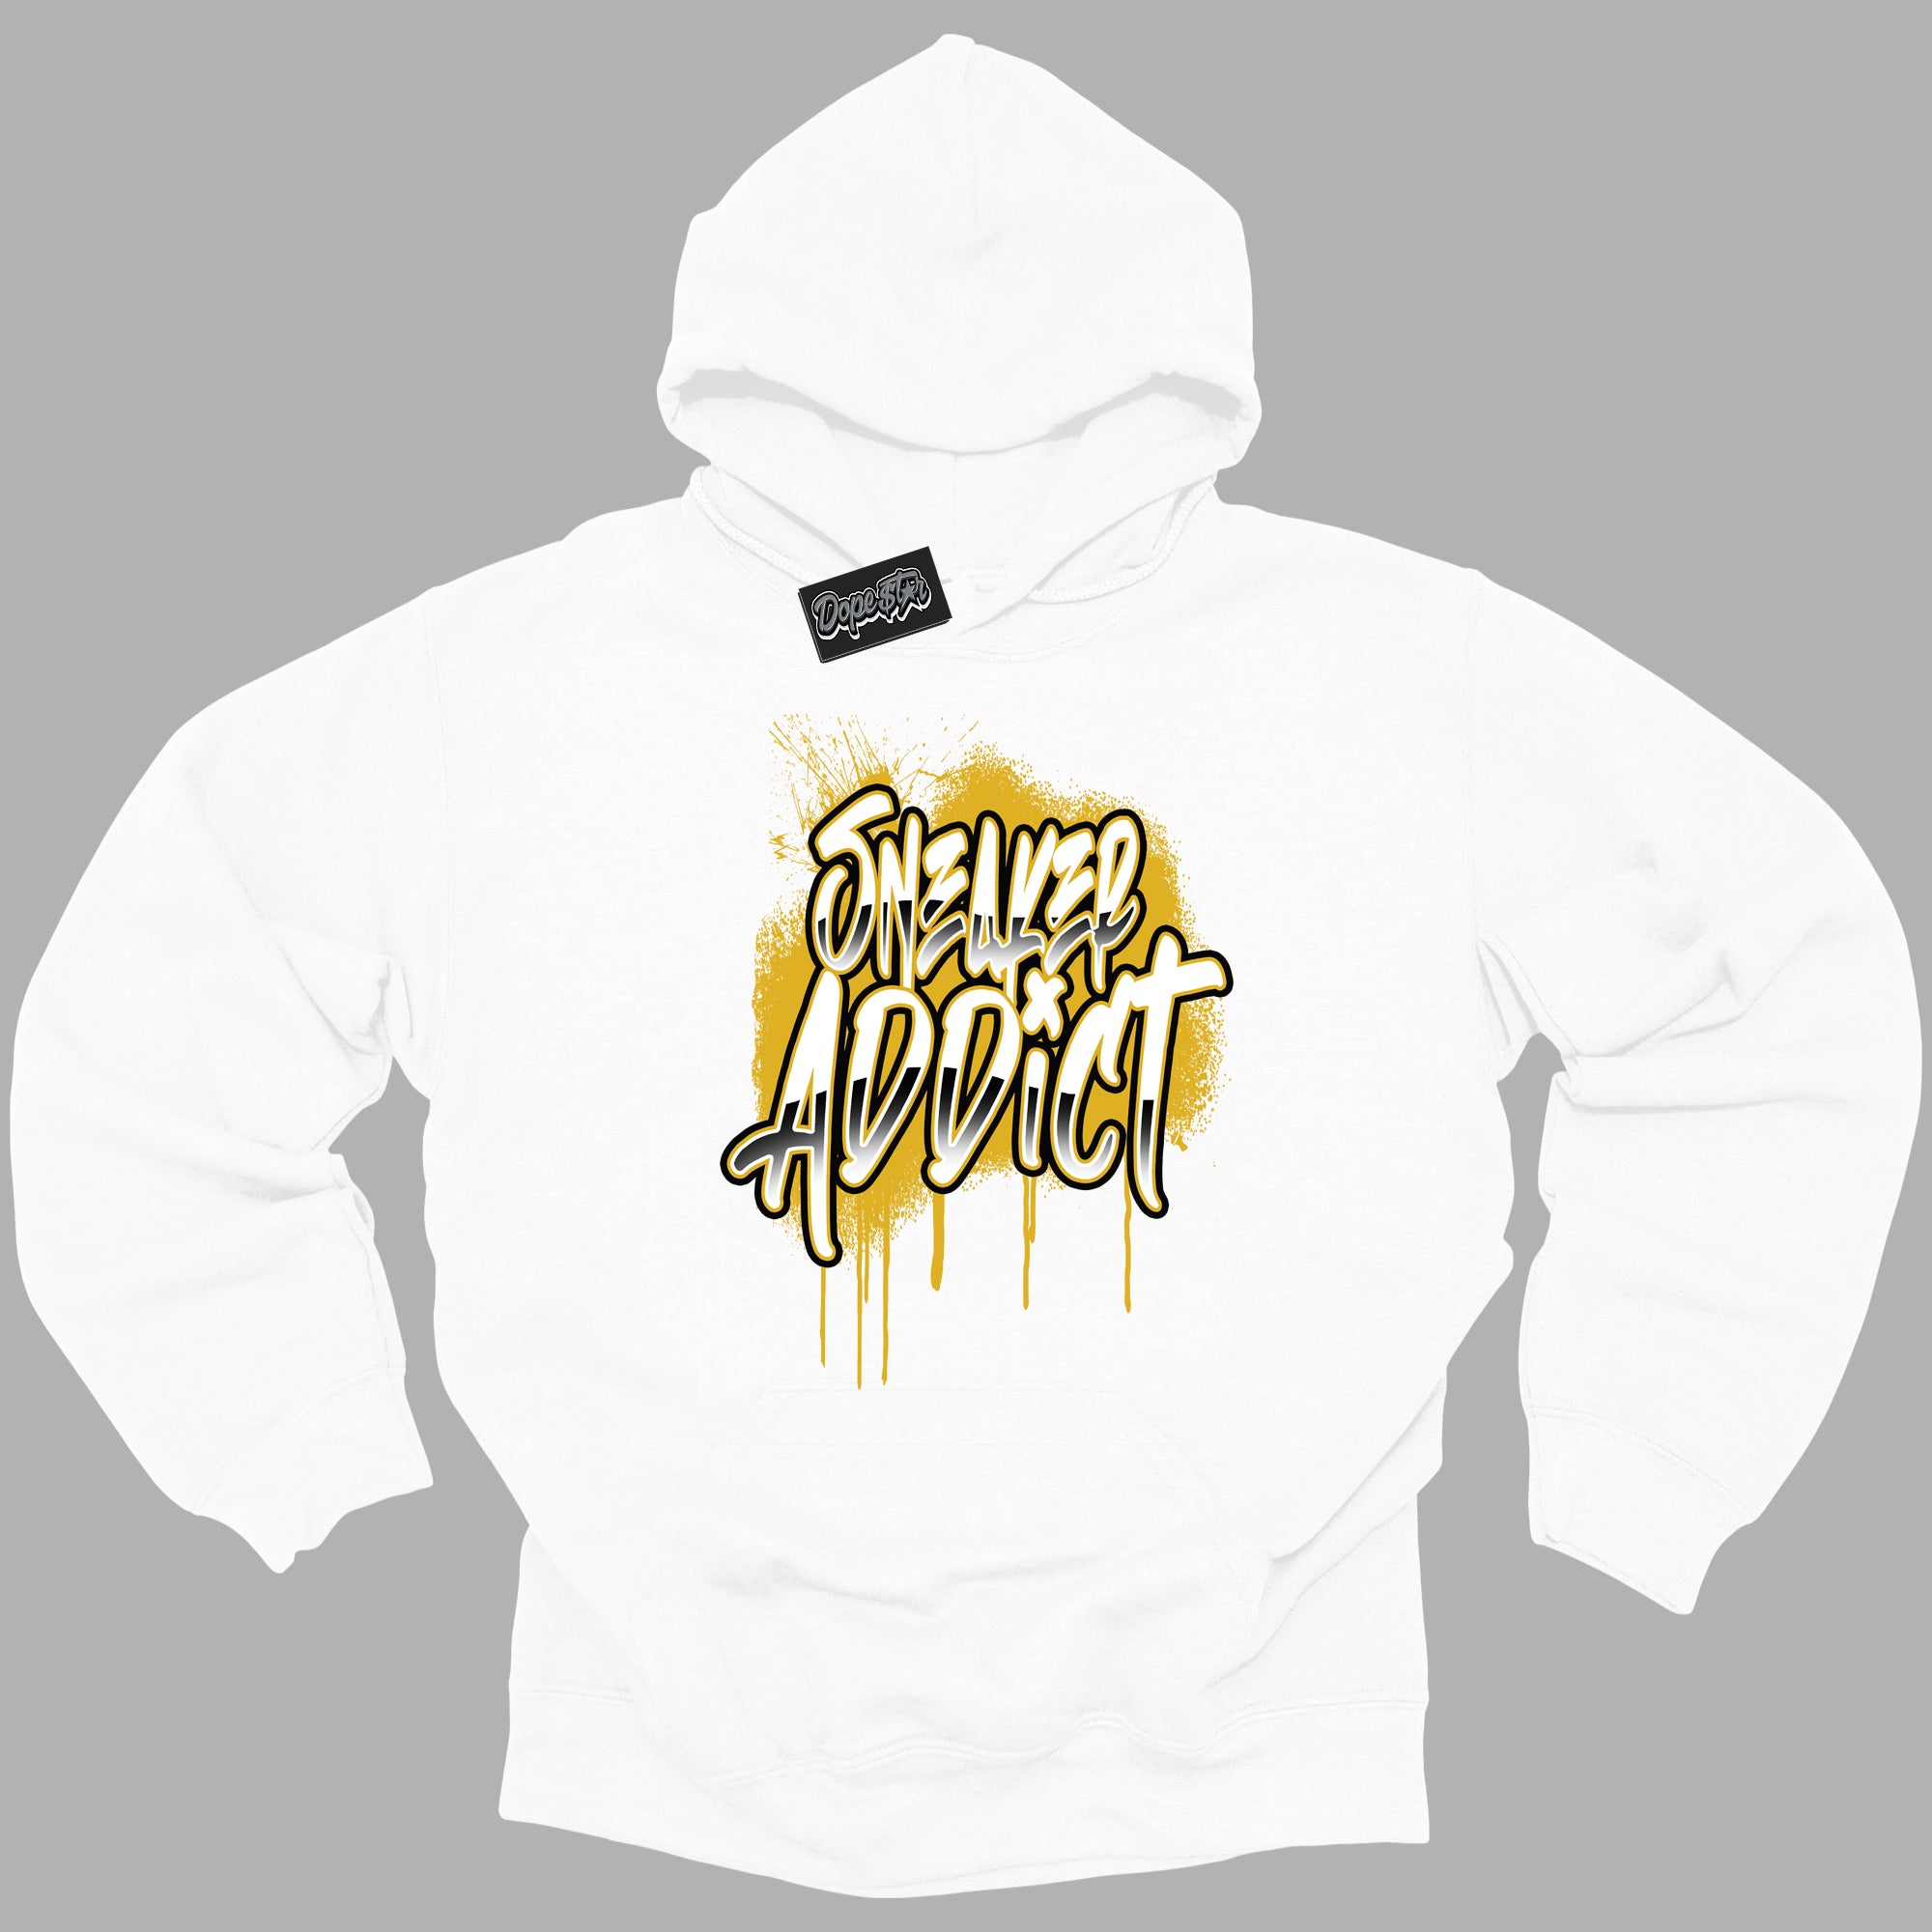 Cool White Hoodie with “ Sneaker Addict ”  design that Perfectly Matches Yellow Ochre 6s Sneakers.